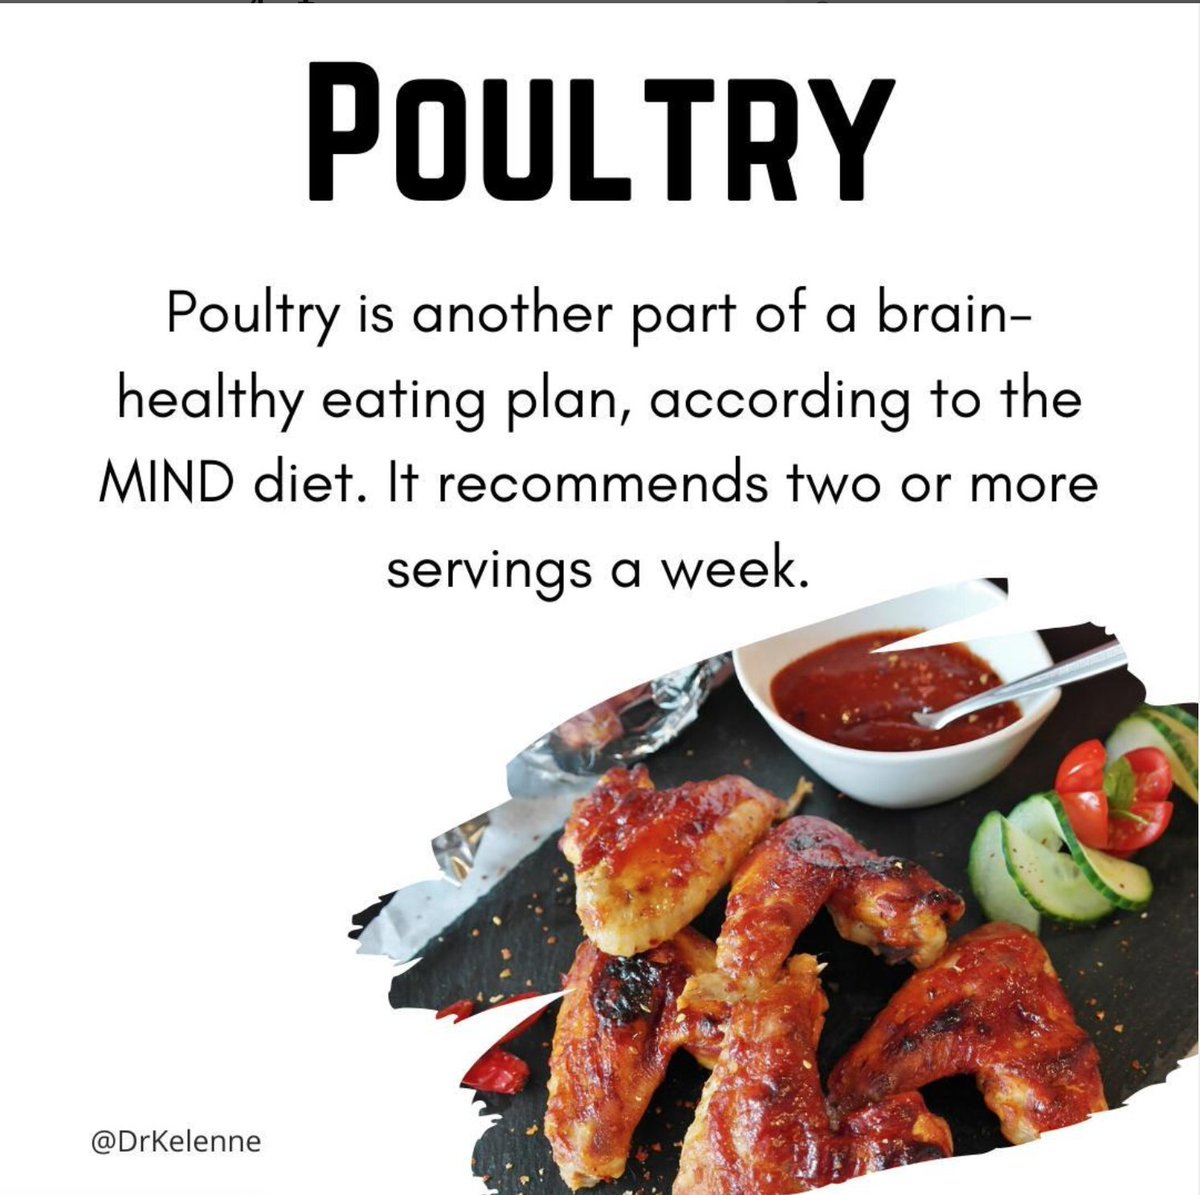 For poultry, two or more servings a week is recommended for a healthy MIND diet.

#healthcaretips #familymedicine #caribbean #blackdoctor #telemedicine #telehealth #yourcaribbeandoctor #healthysnacks 🇹🇹🇻🇨🇵🇷🇦🇬🇧🇸🇧🇧🇧🇷🇨🇦🇫🇰🇬🇩🇬🇾🇯🇲🇭🇹🇱🇨🇰🇳